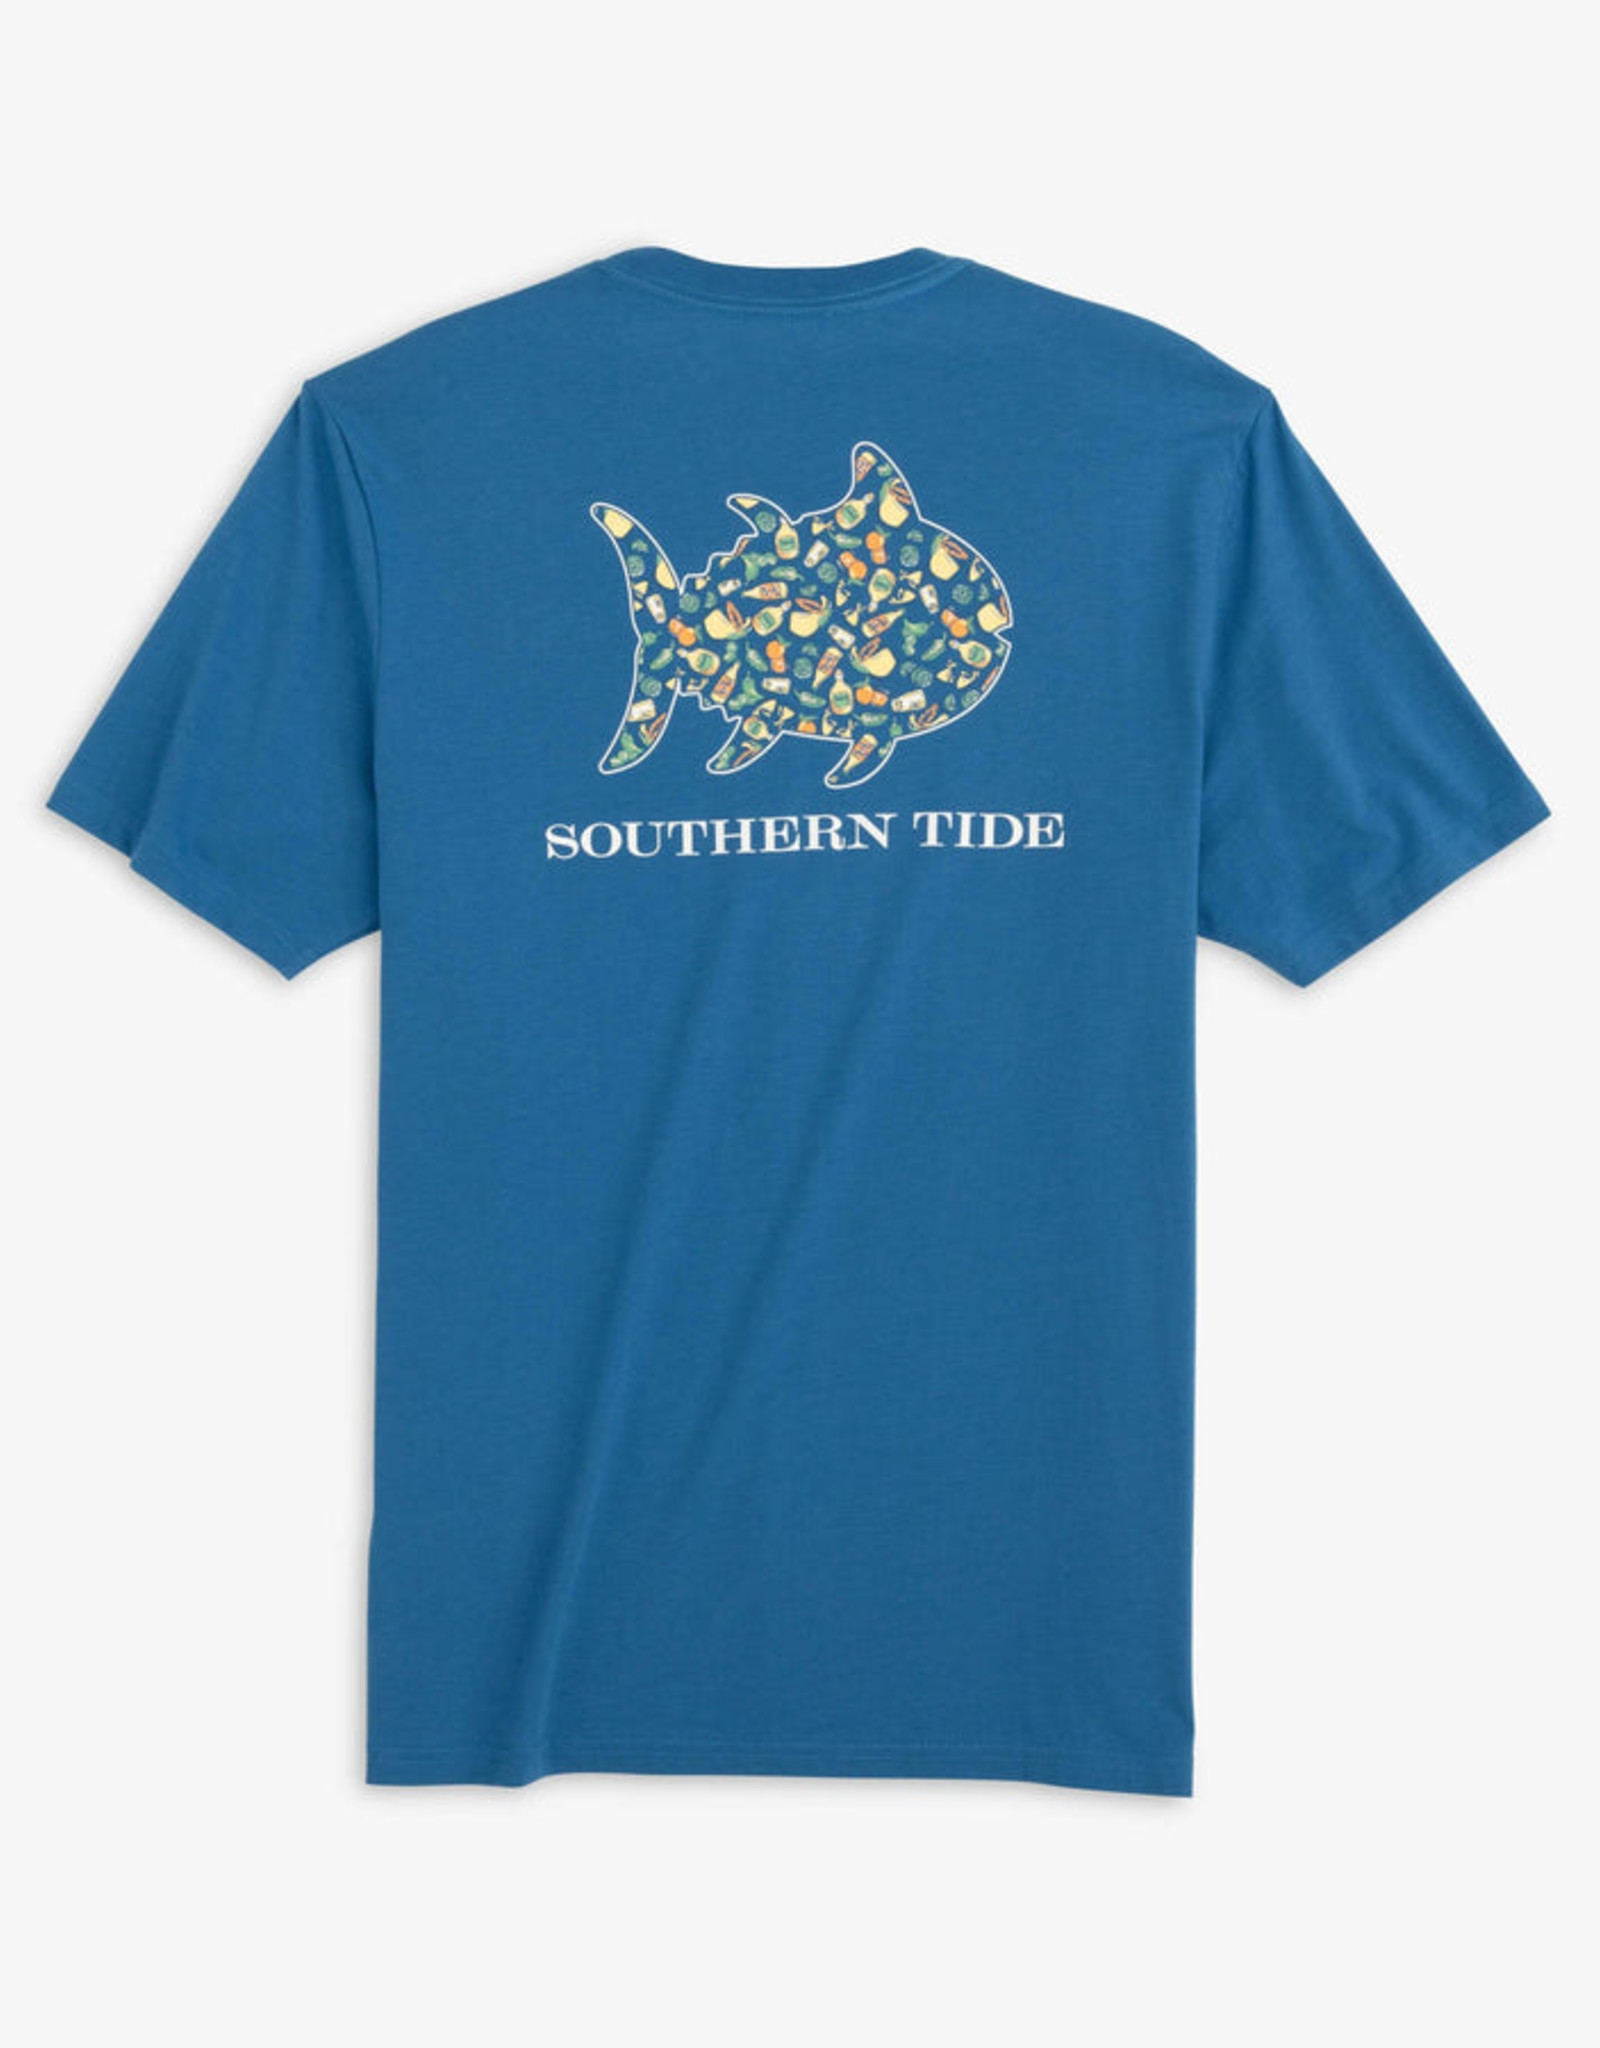 Southern Tide Marg Madness SJ Tee